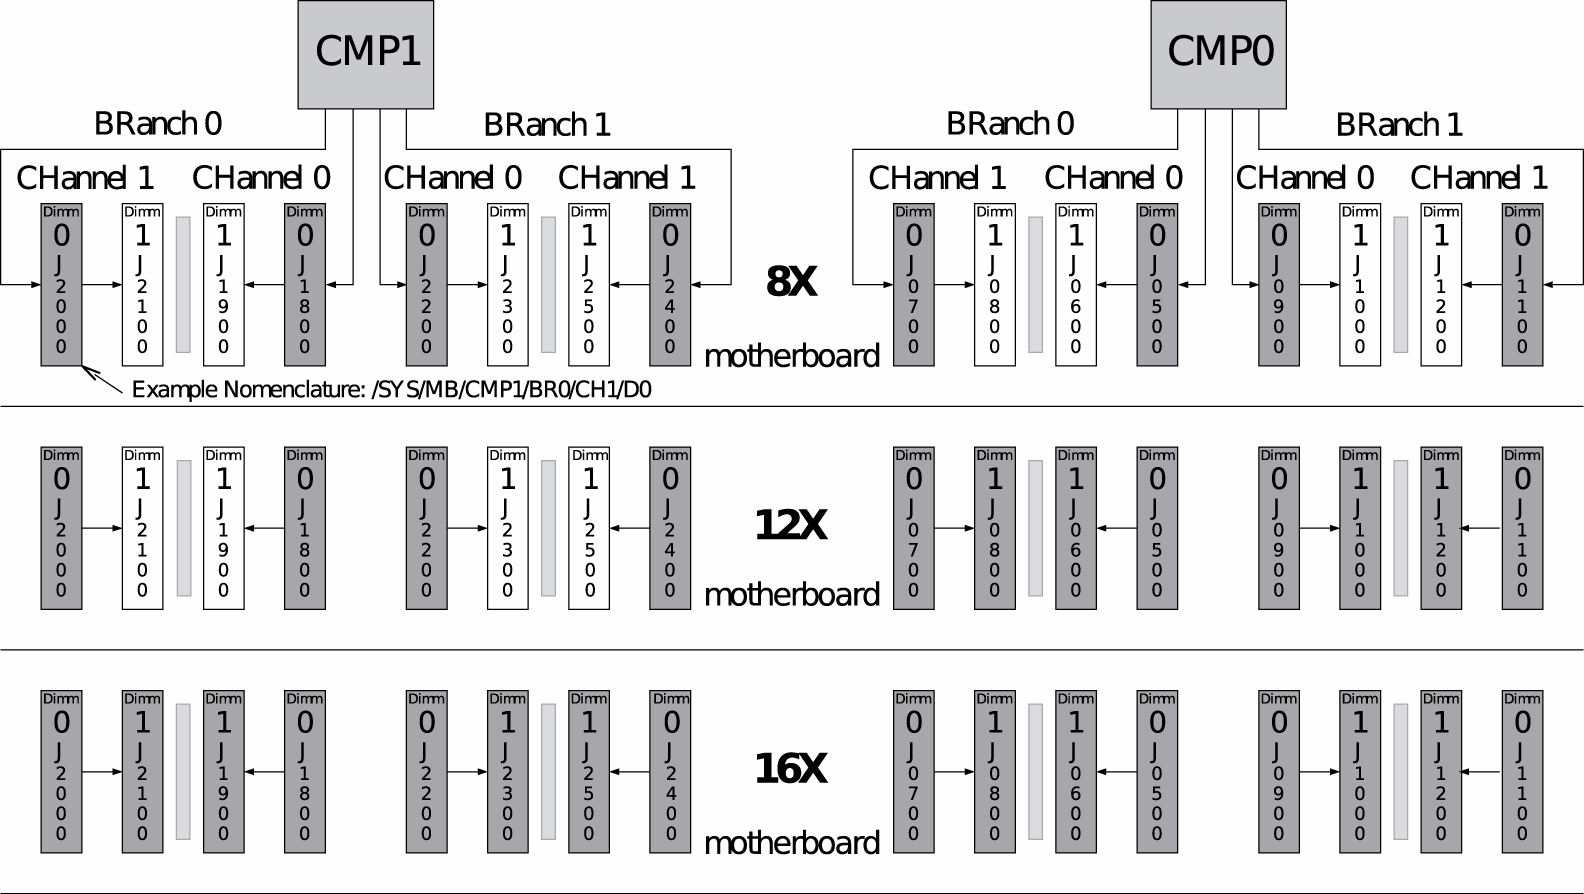 FIGURE: FB-DIMM Configuration on Motherboard (SPARC Enterprise T5240 Servers) The following figure shows the